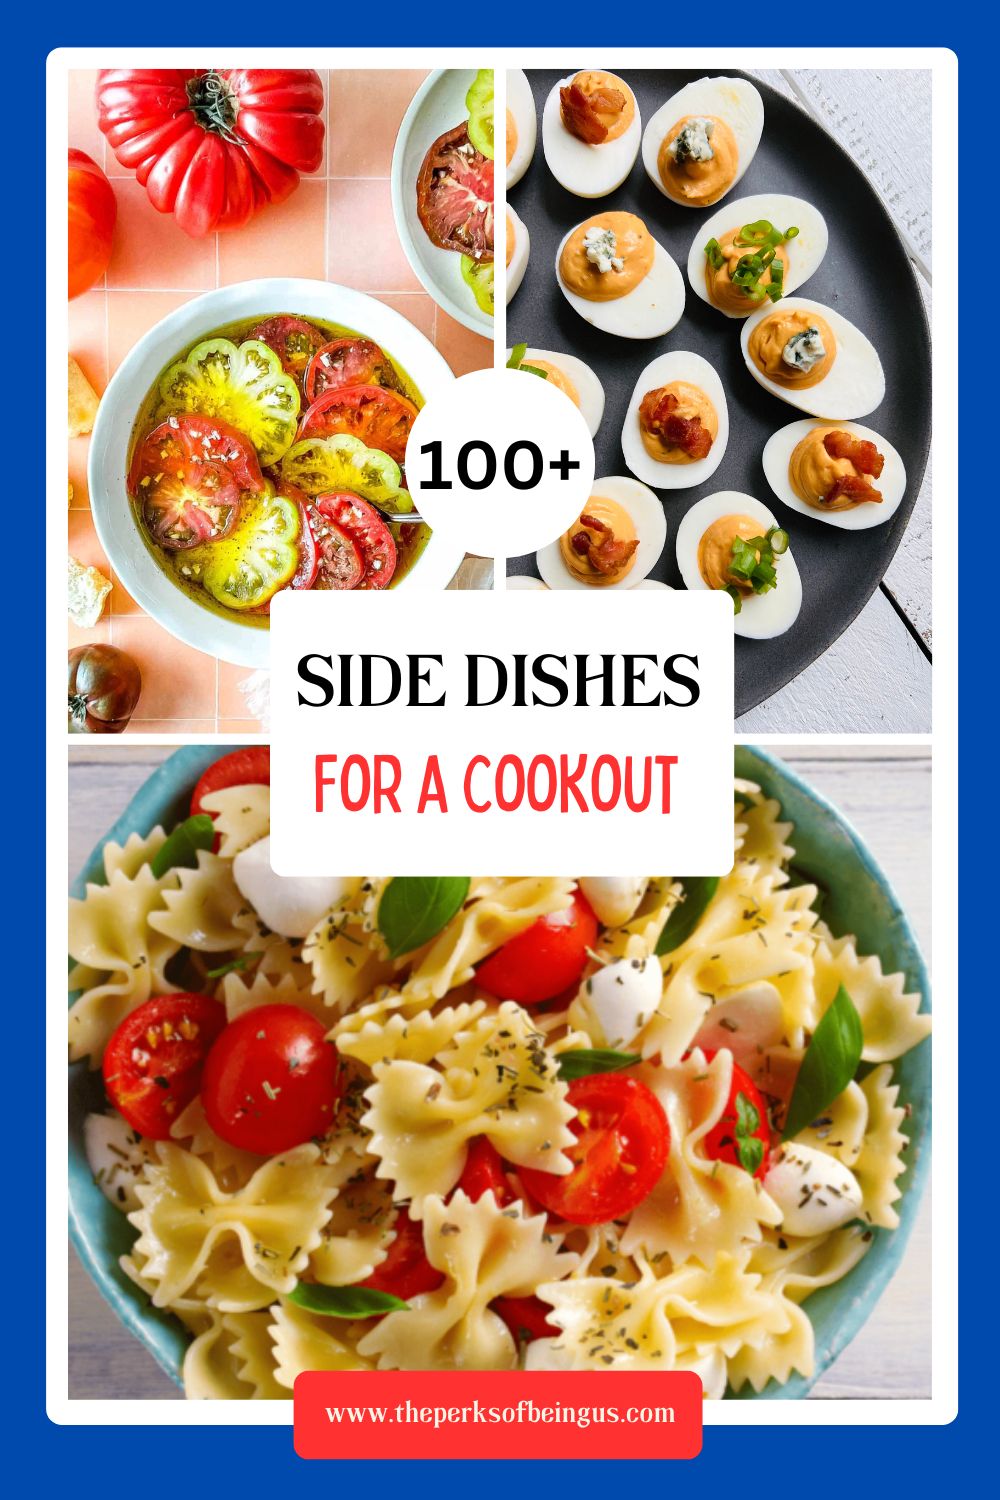 COLLAGE OF SIDE DISHES